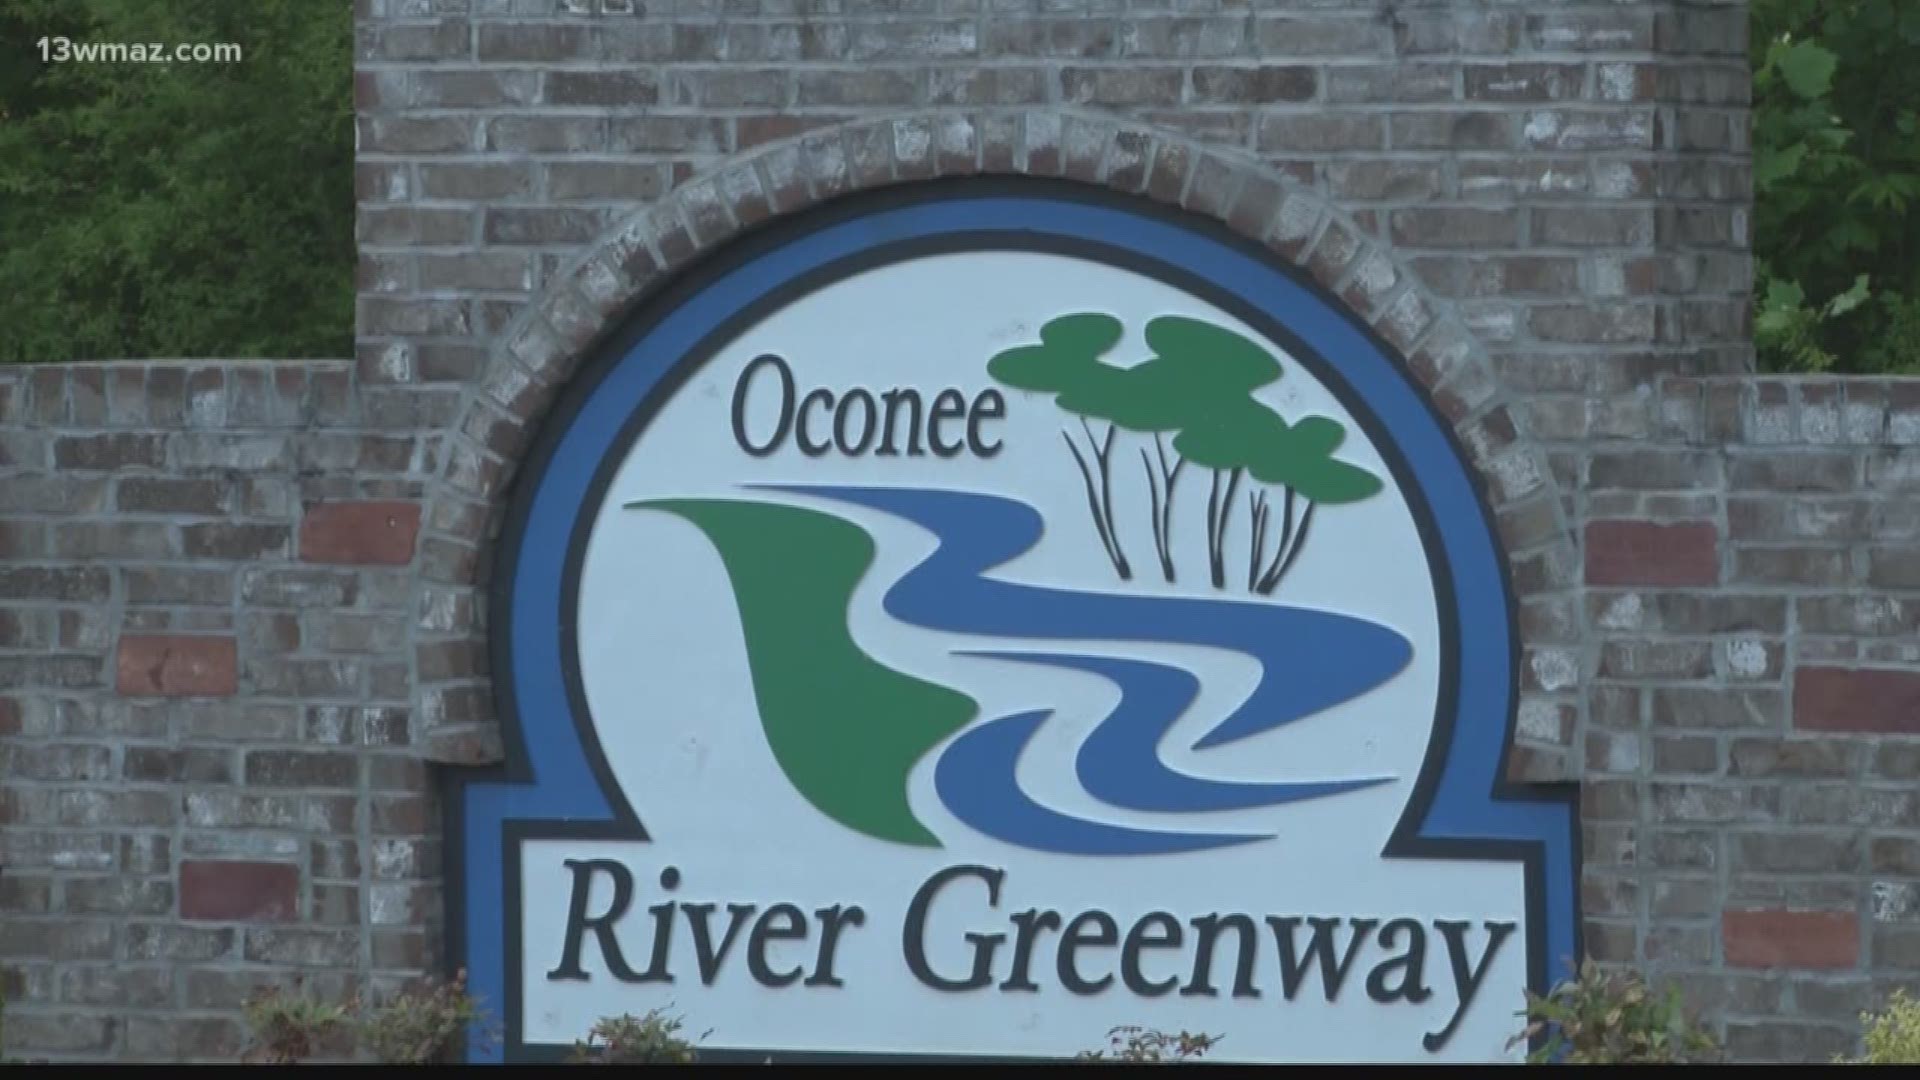 Crews recover body of missing GMC student in Oconee River Greenway